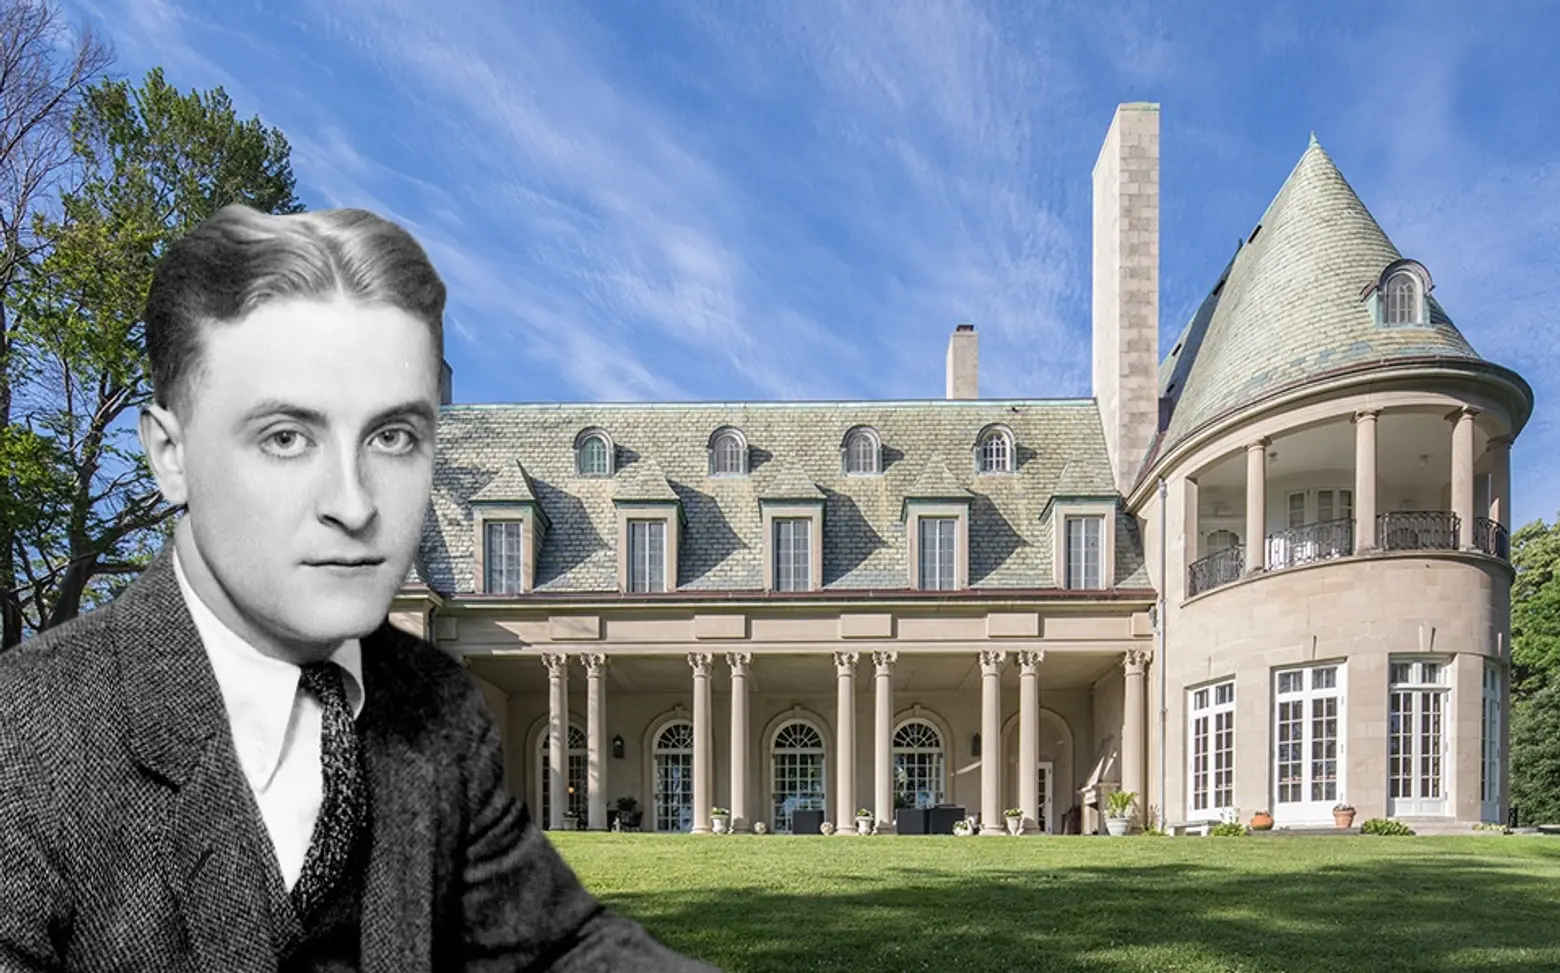 Hamptons estate that was F. Scott Fitzgerald’s inspiration for ‘The Great Gatsby’ asks $17M